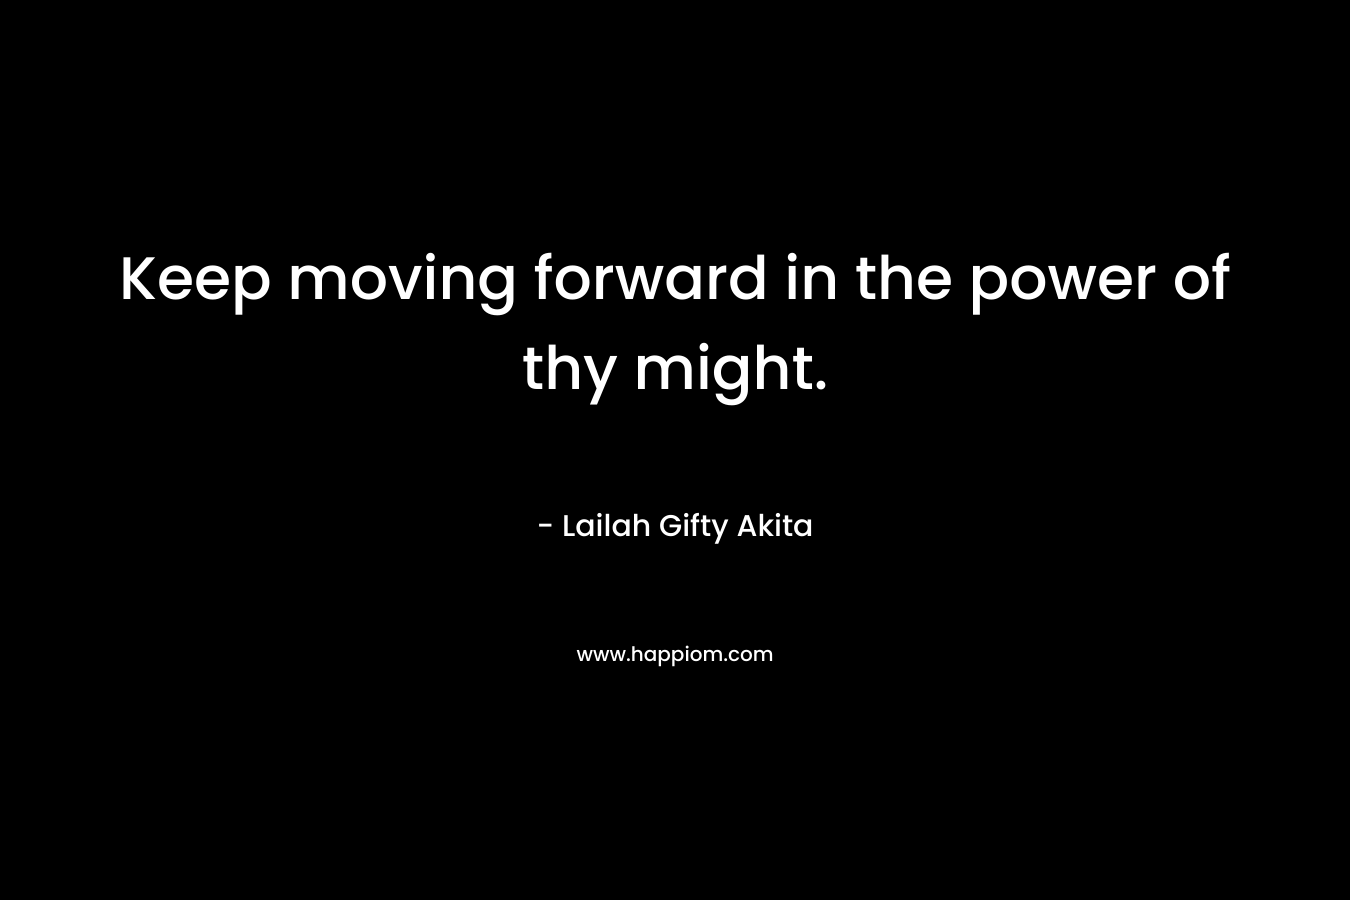 Keep moving forward in the power of thy might.